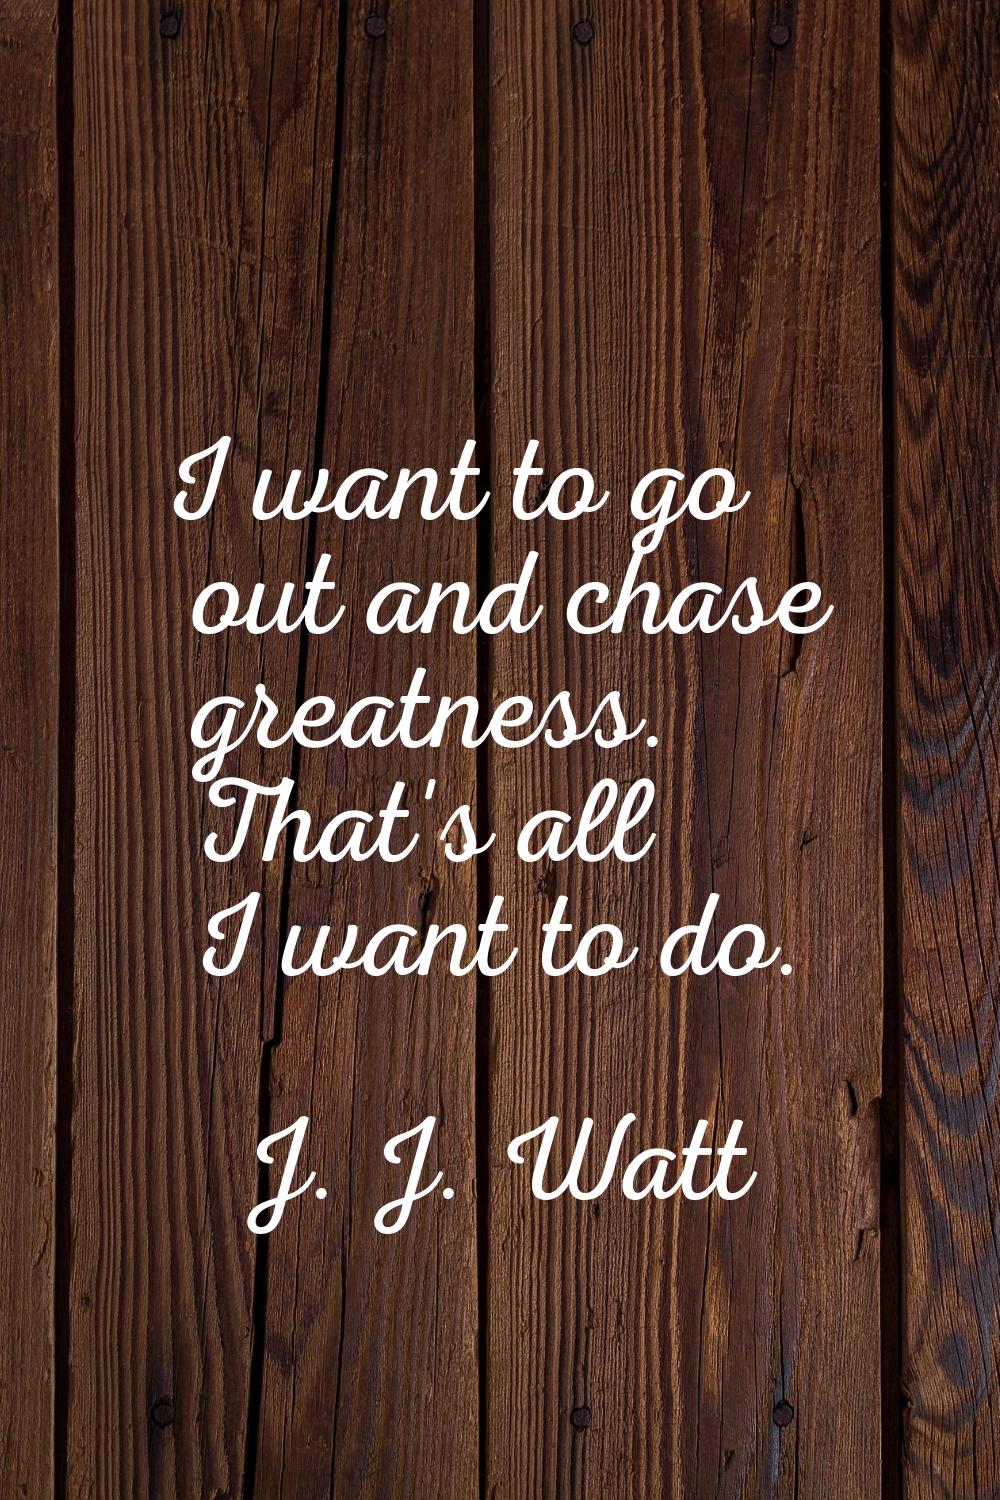 I want to go out and chase greatness. That's all I want to do.